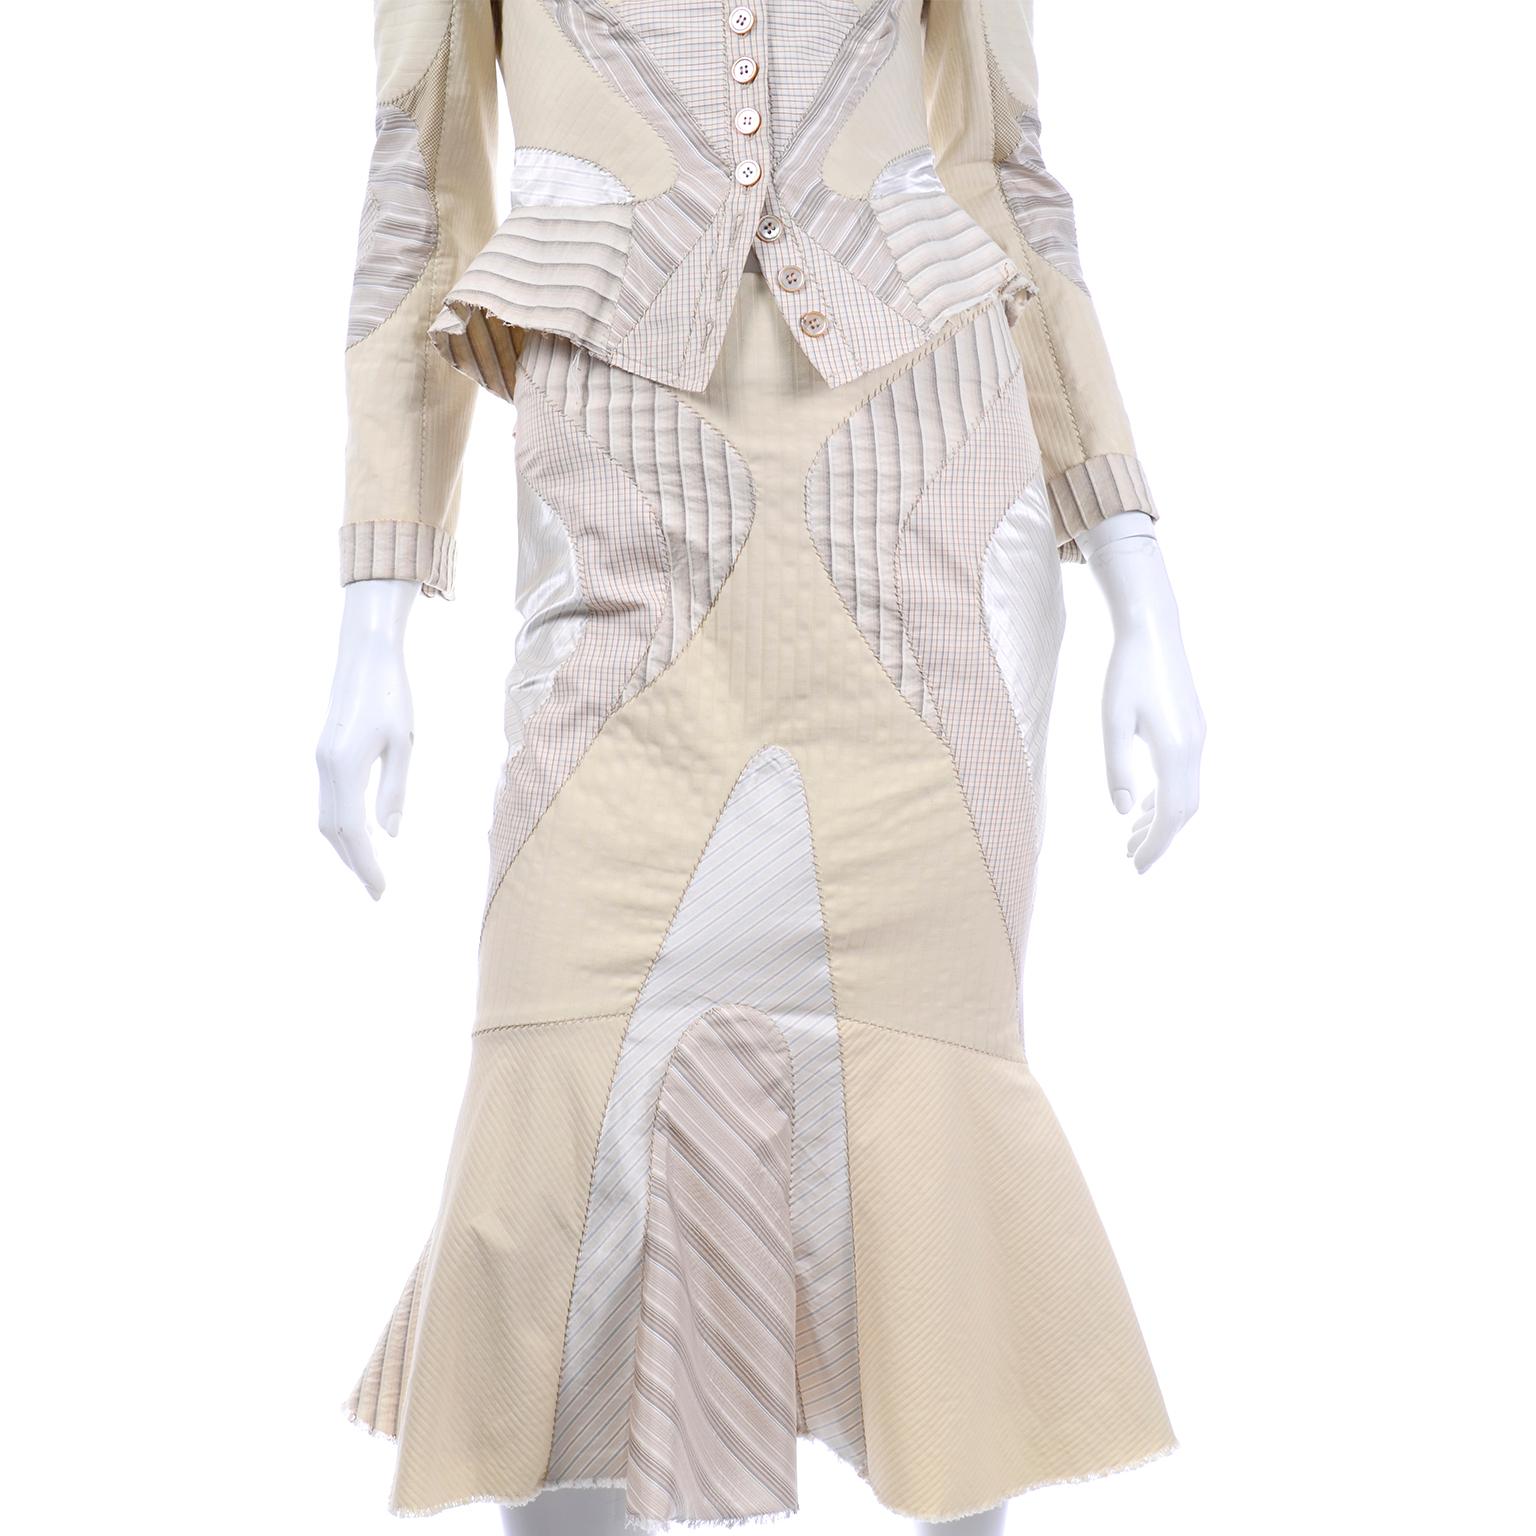 Alexander McQueen Spring 2004 Deliverance Patchwork 2pc Skirt & Jacket Outfit  11